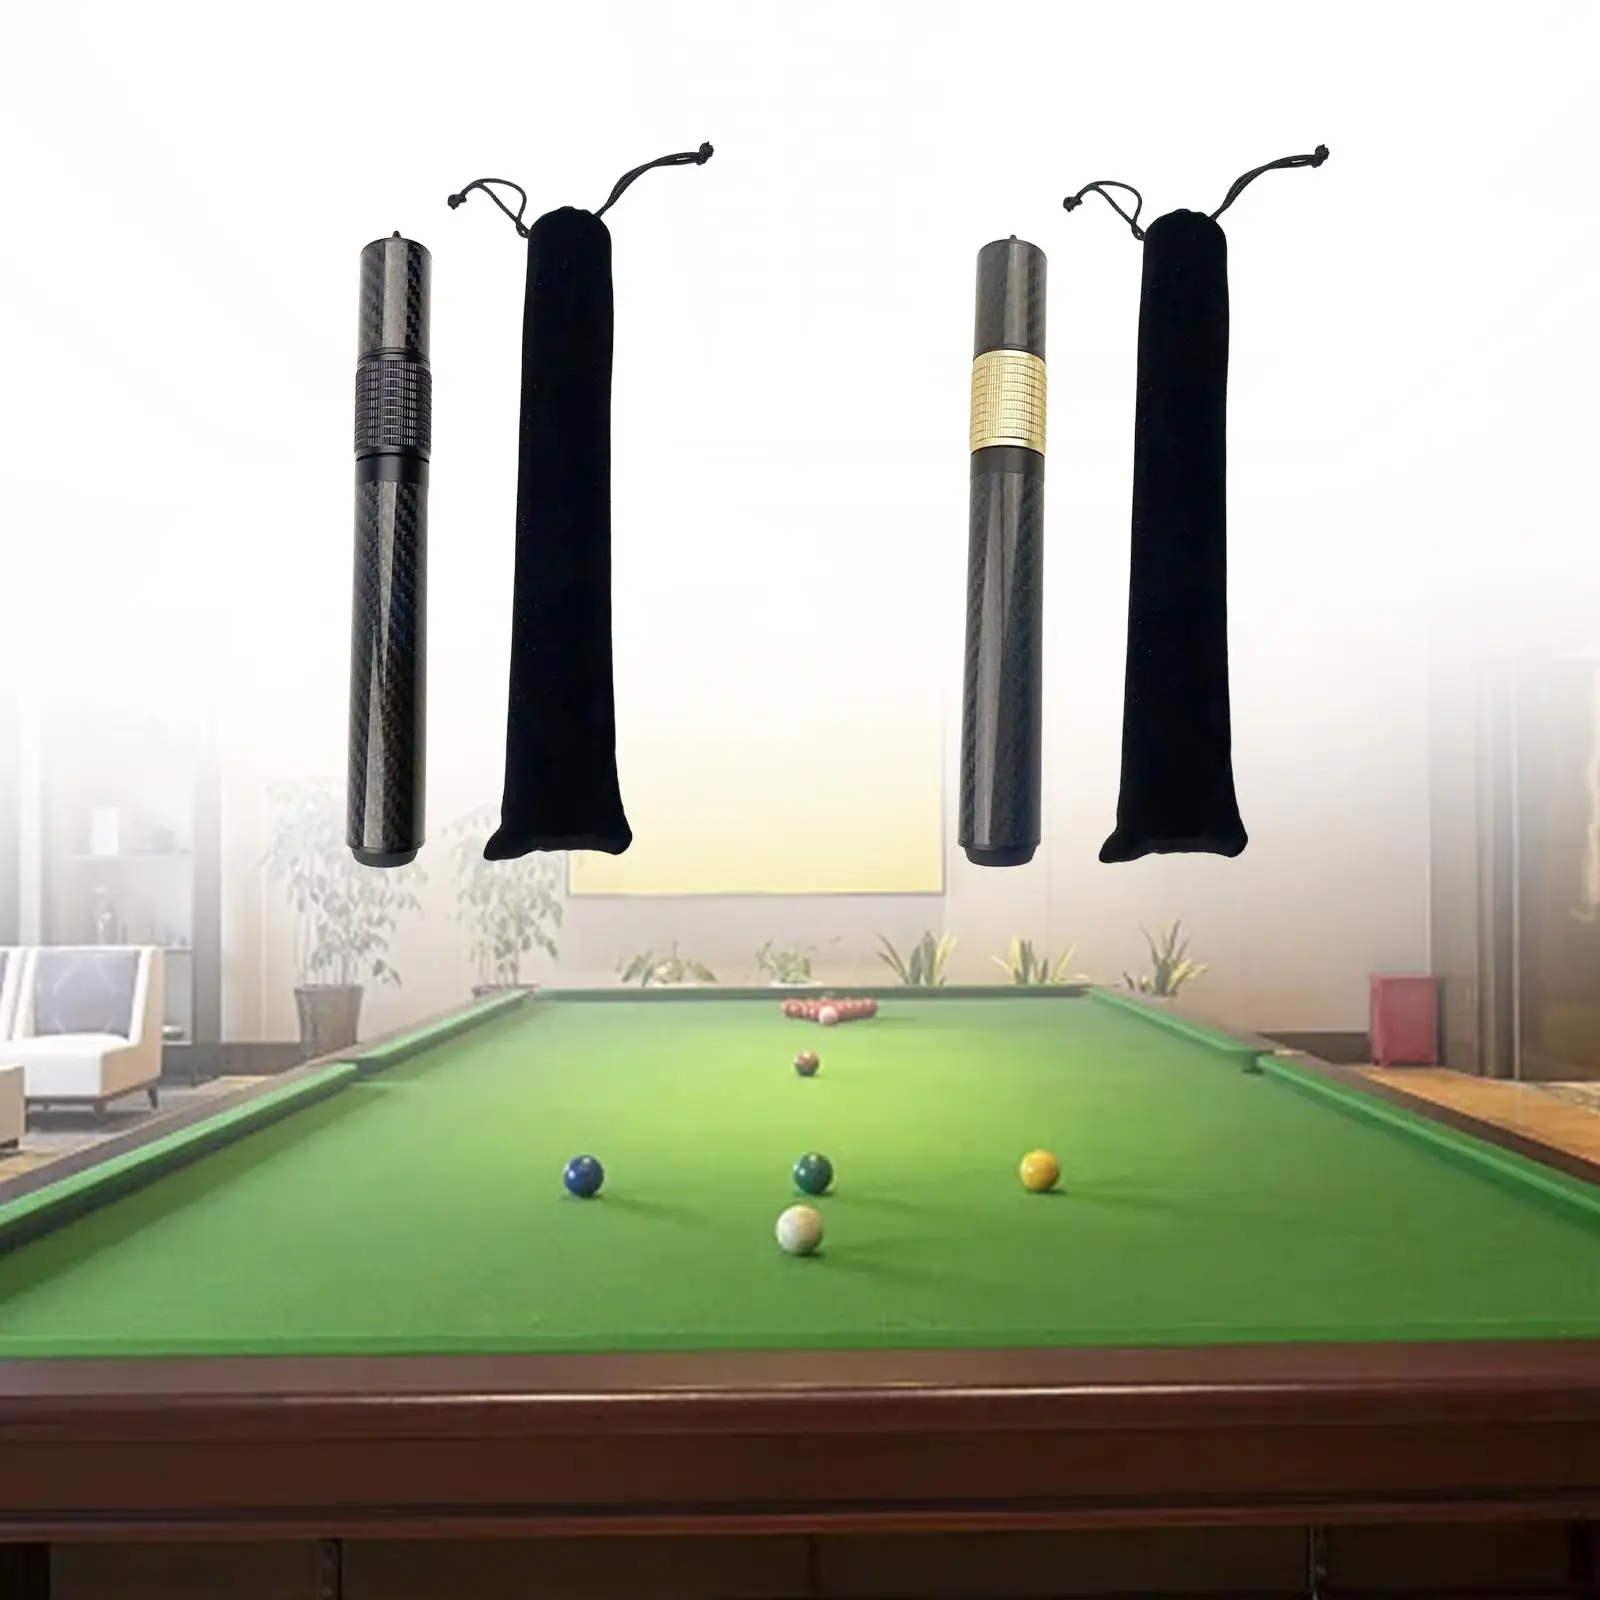 Billiards Pool Cue Extension Billiard Connect Shaft Billiards Pool Cue Accessory Adjustment for Enthusiast Lovers Professional